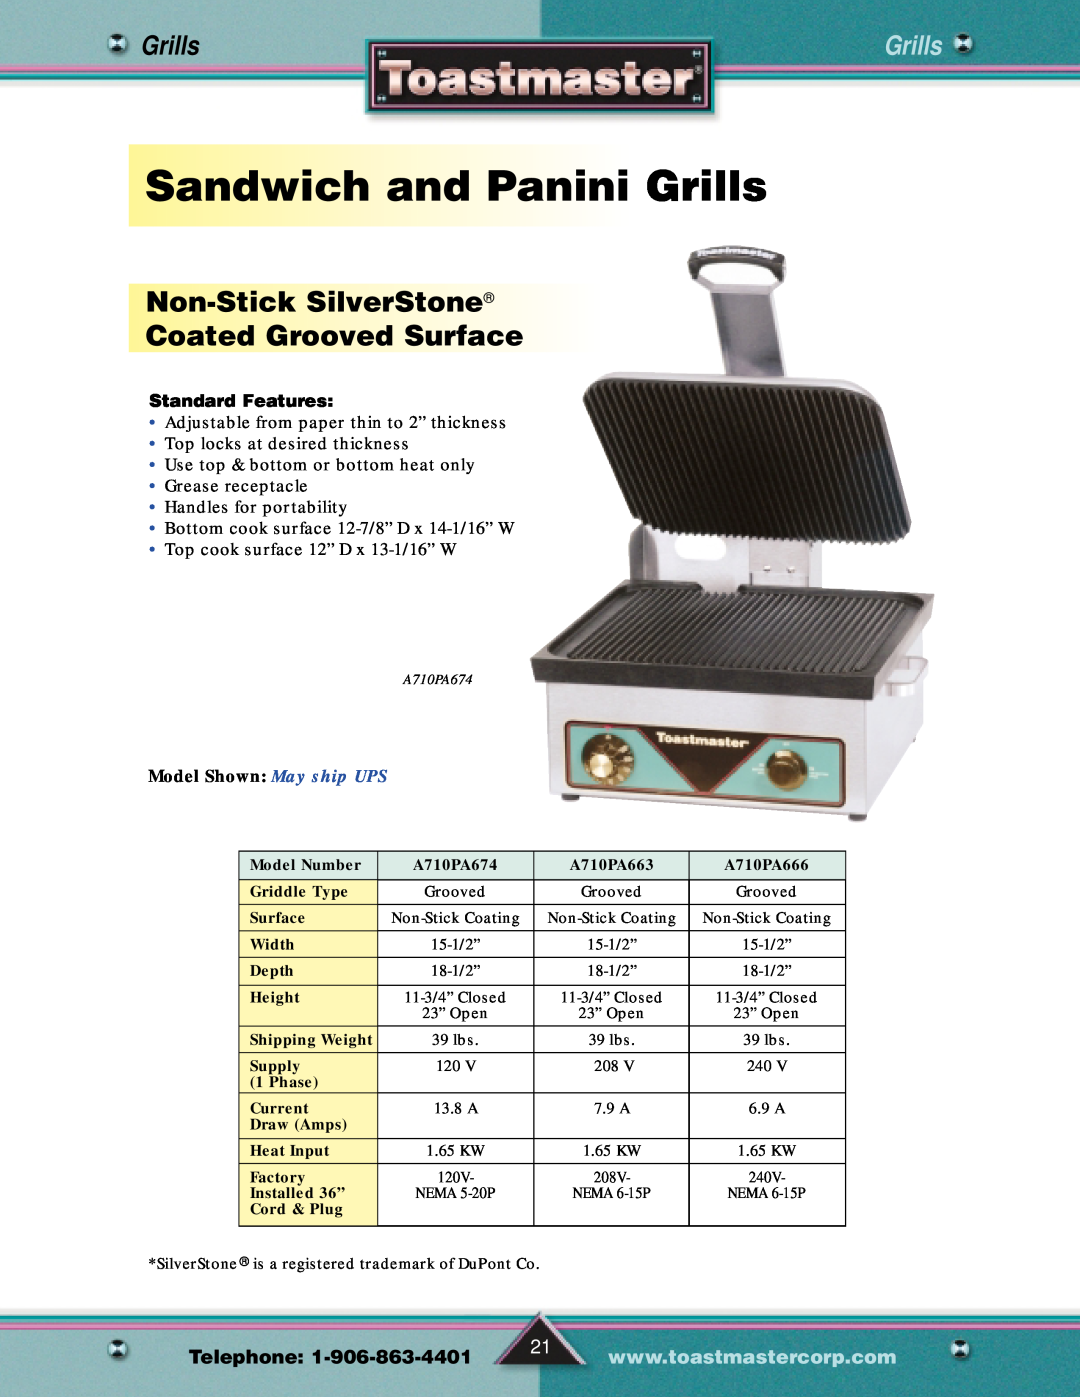 Toastmaster Gas & Electric Fryer manual SandwichandPanini Grills, Non-Stick SilverStone Coated Grooved Surface, Telephone 